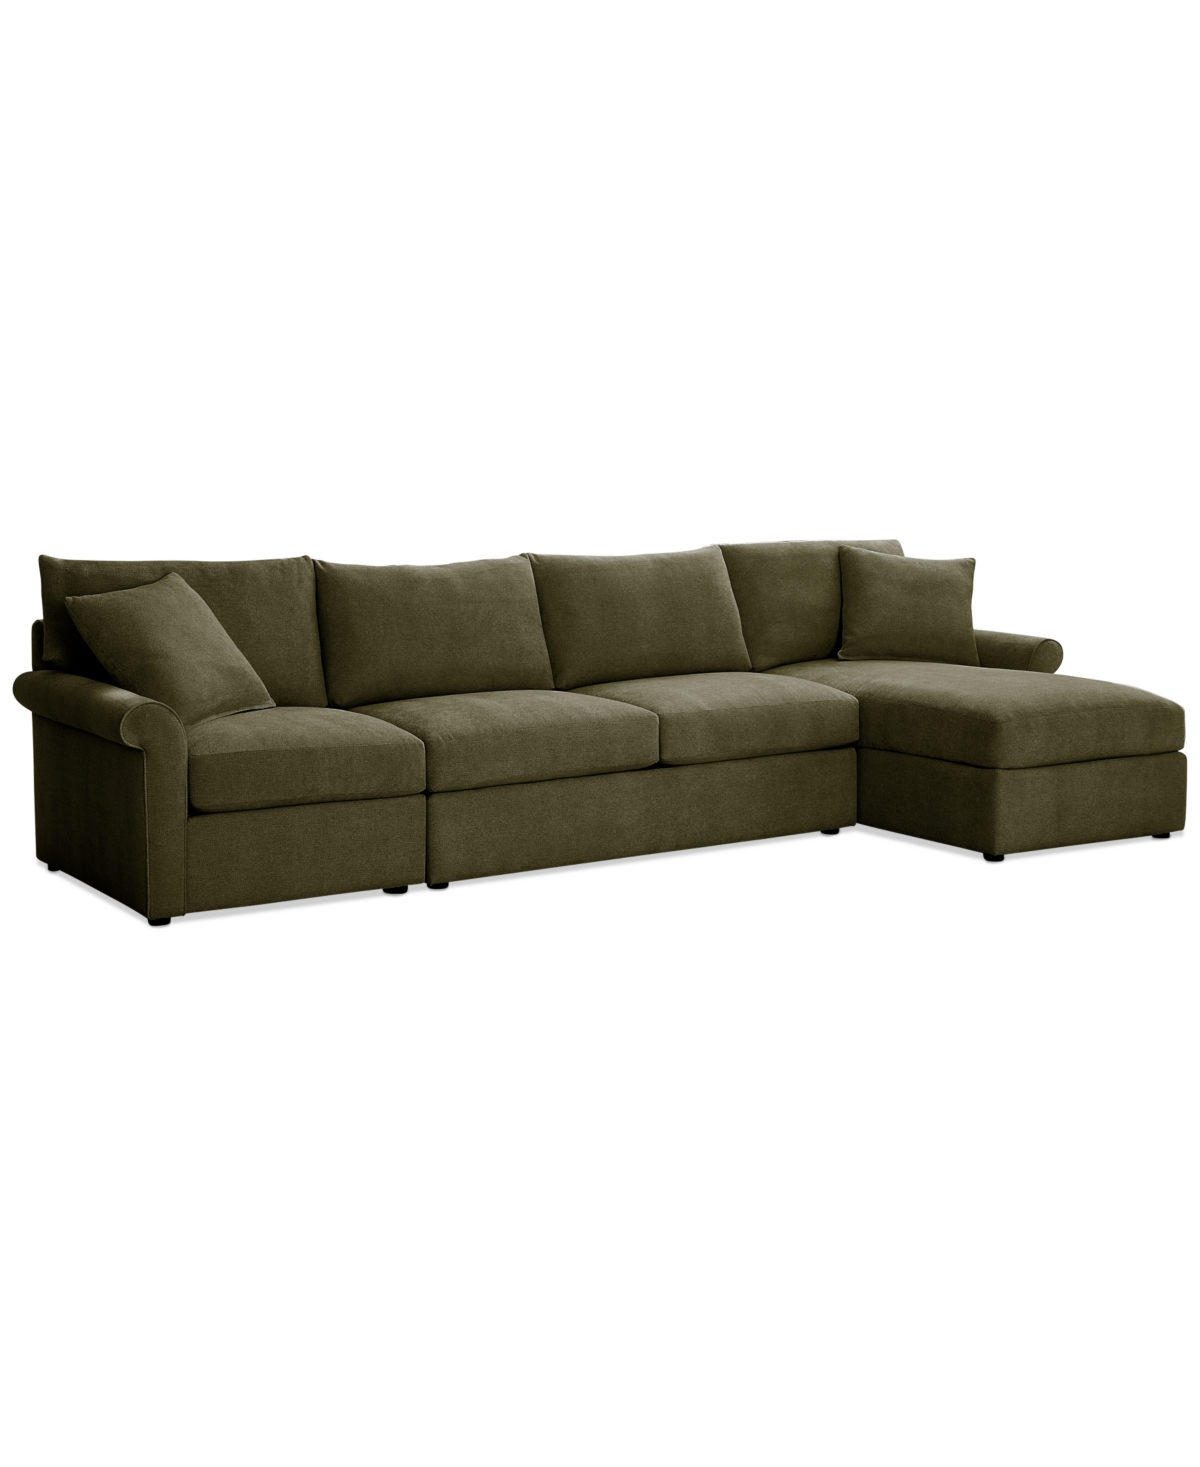 Furniture Wrenley 134" 3-pc. Fabric Sectional Chaise Sofa, Created For Macy's In Olive